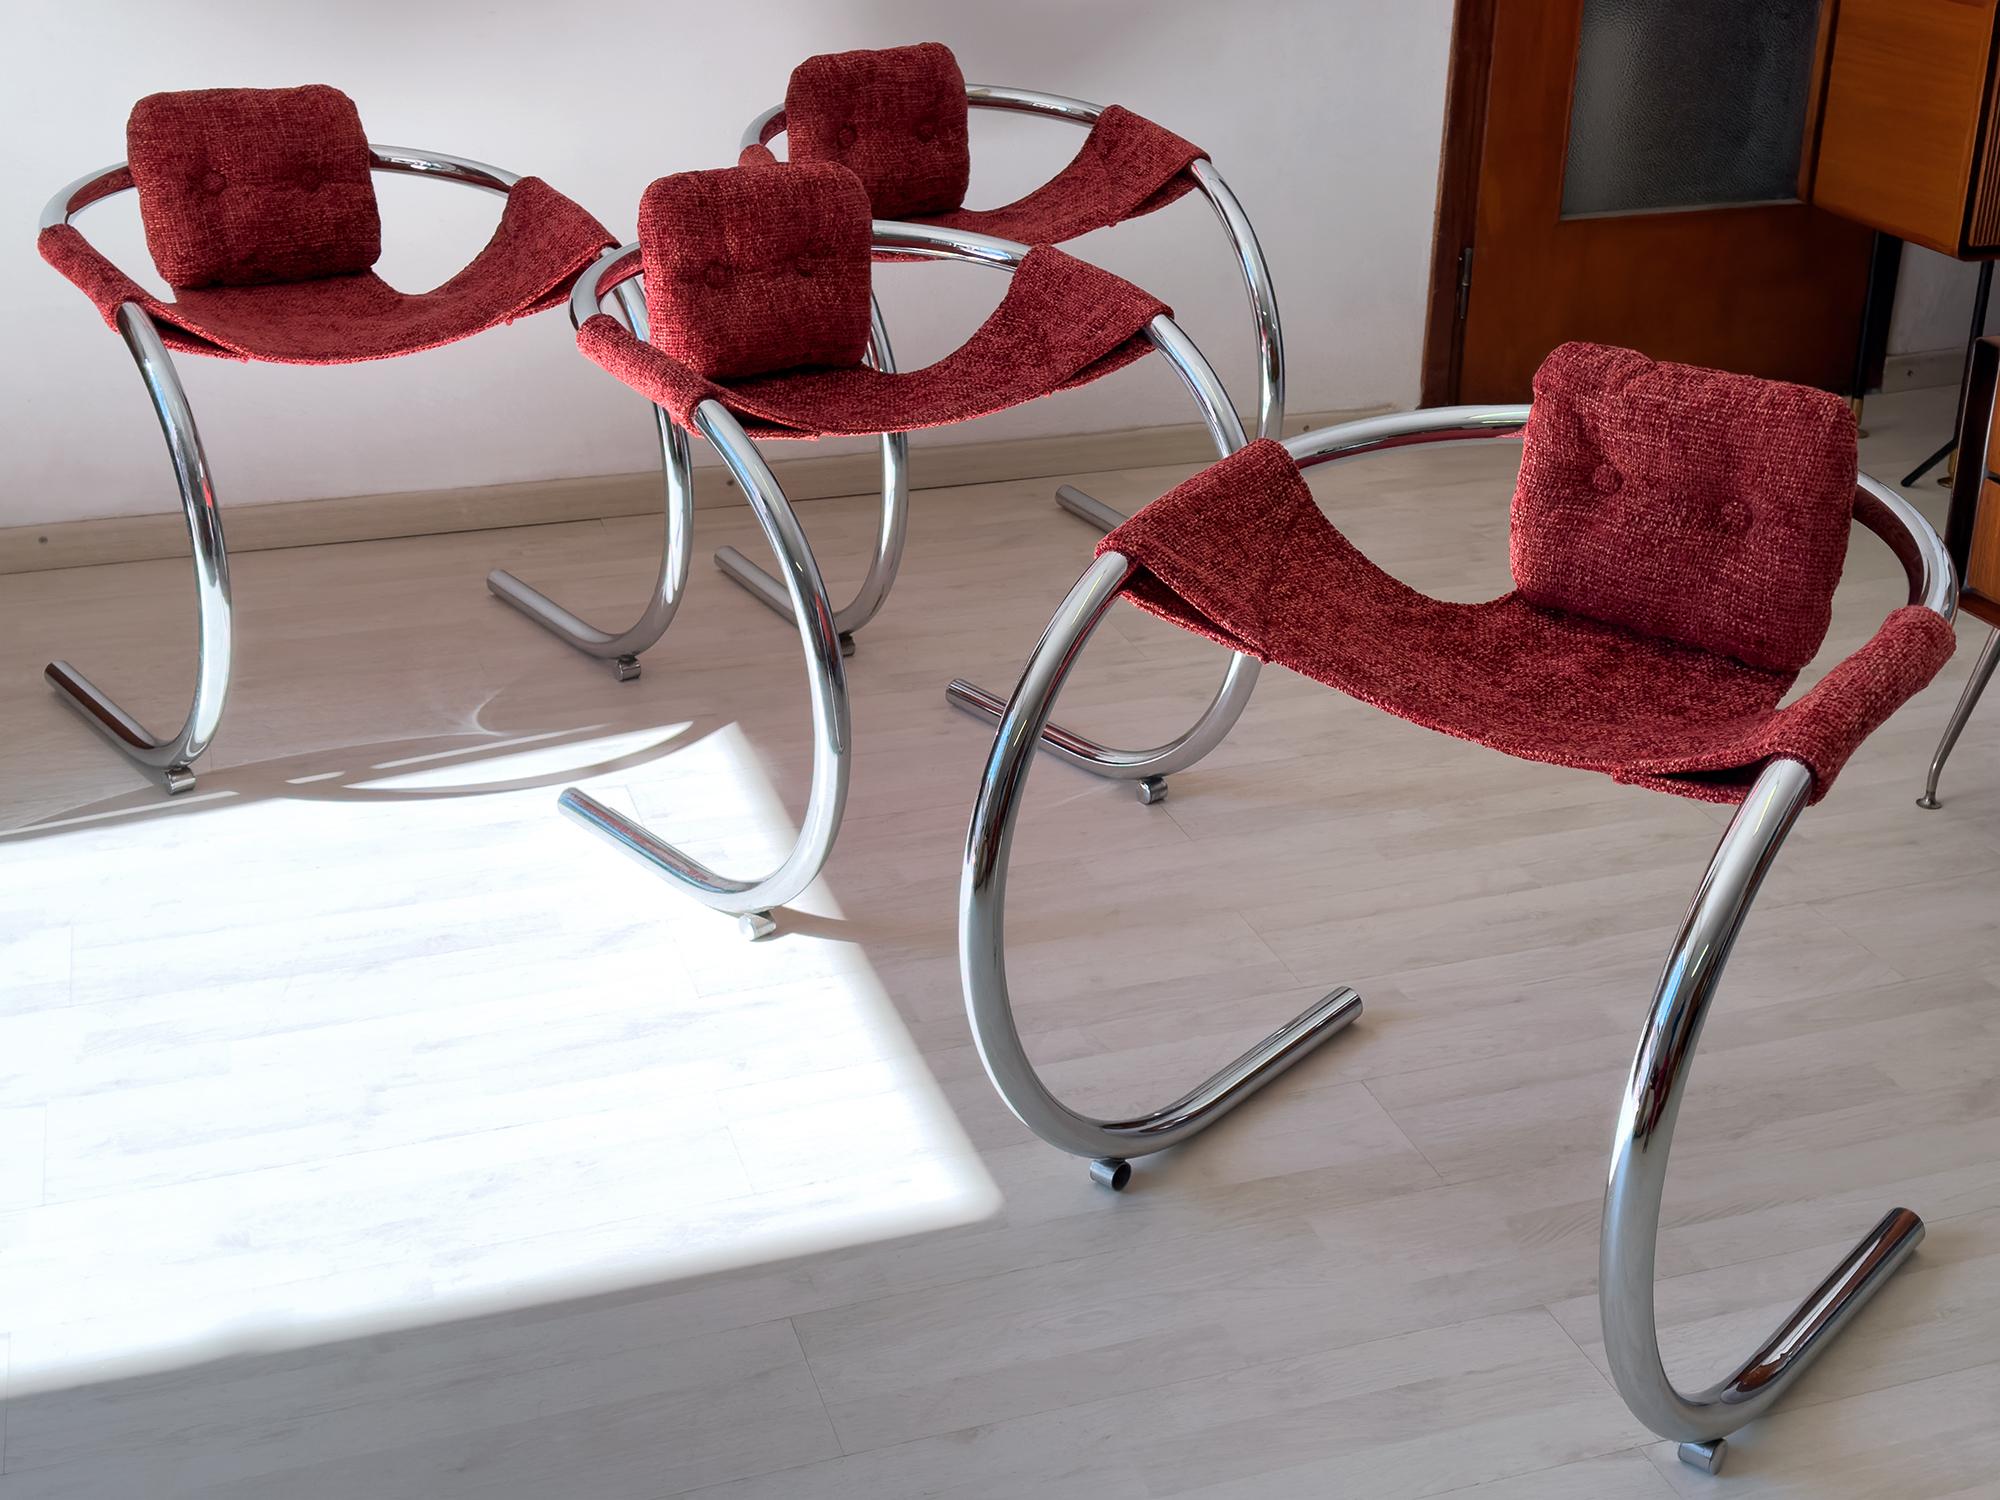 Truly rare and stunning set of four chairs well designed by Byron Botker for Landes Manufacturing Co. in 1970s.
The curved chromed metal structures are very sturdy and in very good condition of the period as the images show, as well as all the